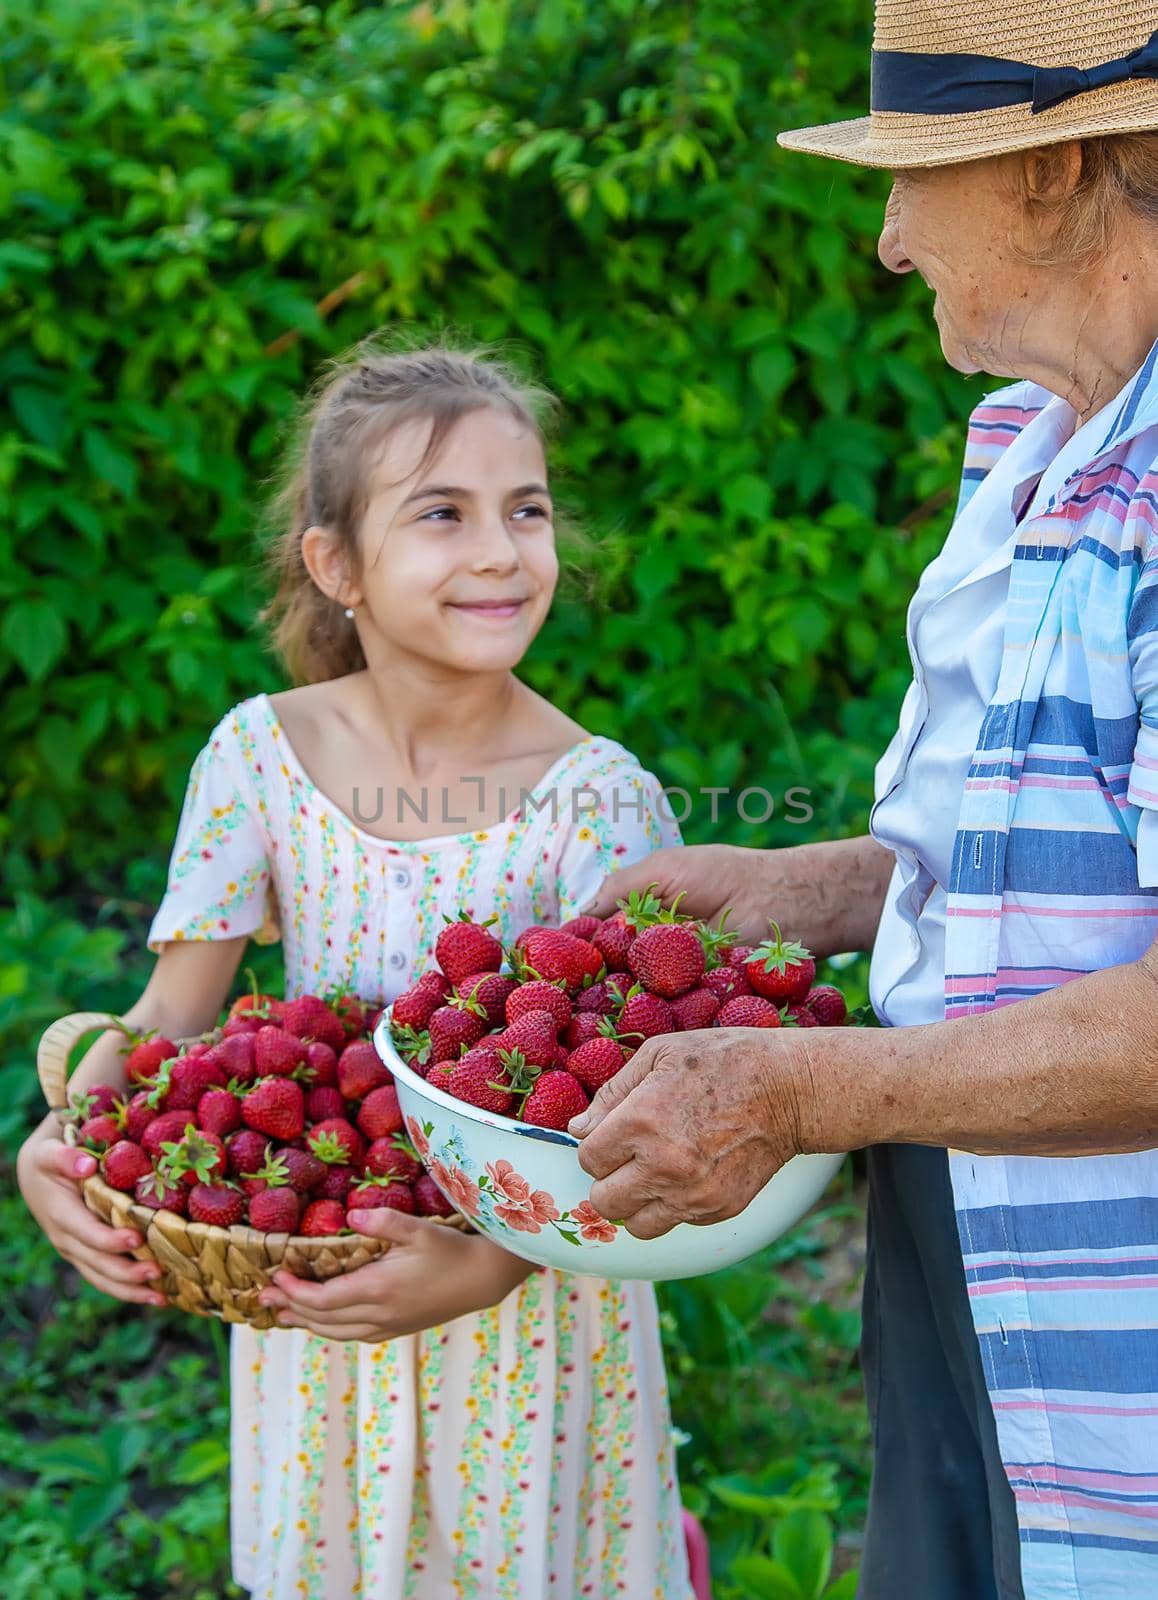 The child and grandmother pick strawberries in the garden. Selective focus. Kid.